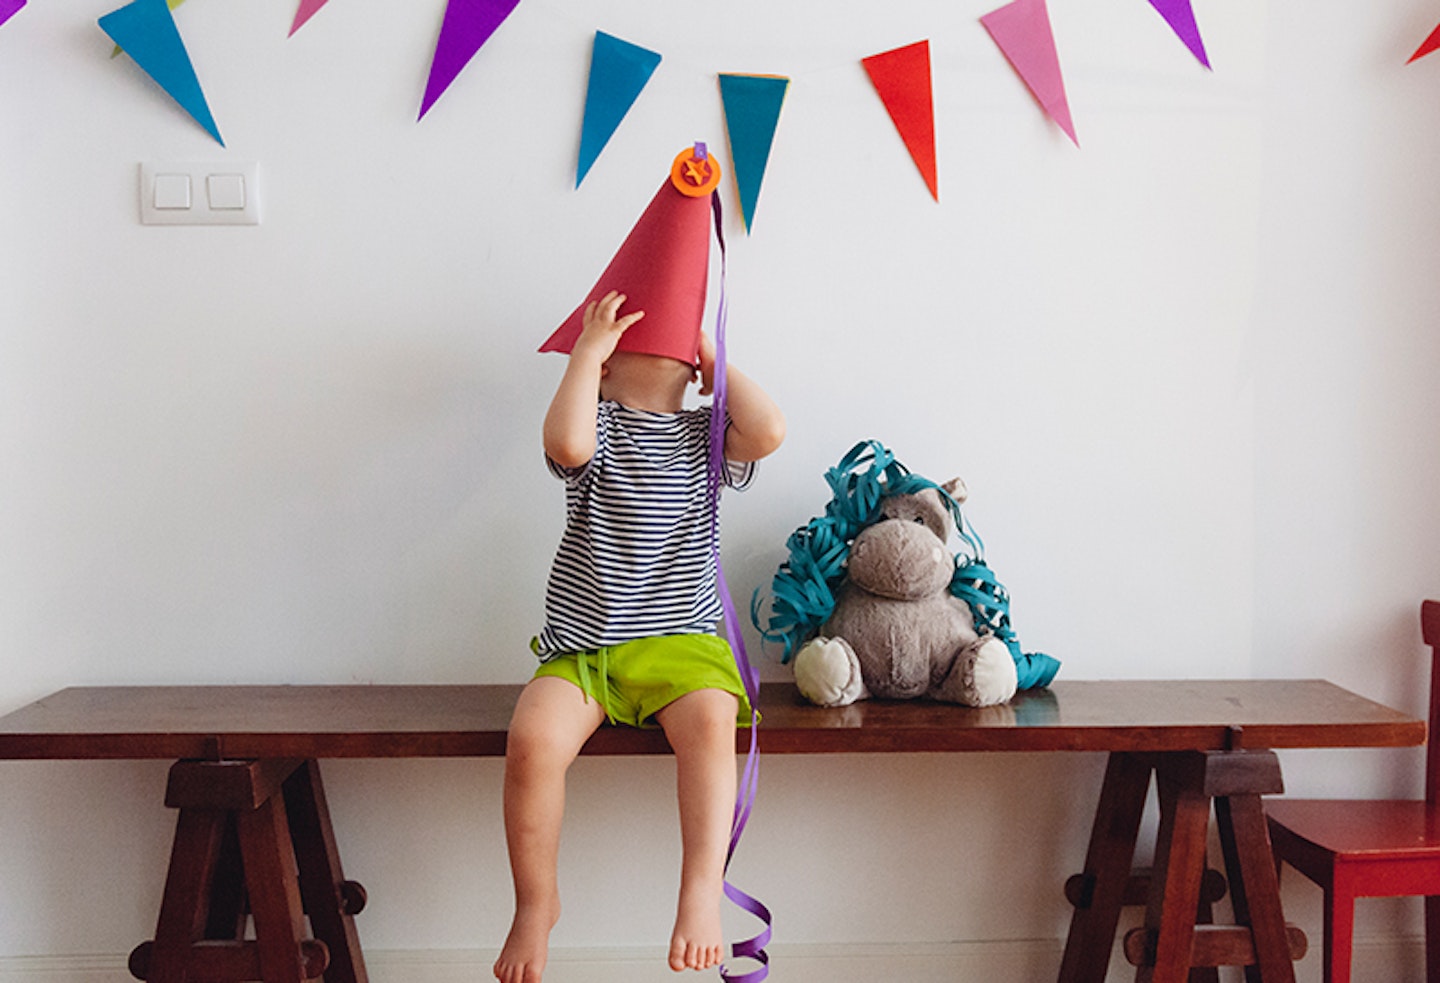 15 things no one warns you about children’s parties